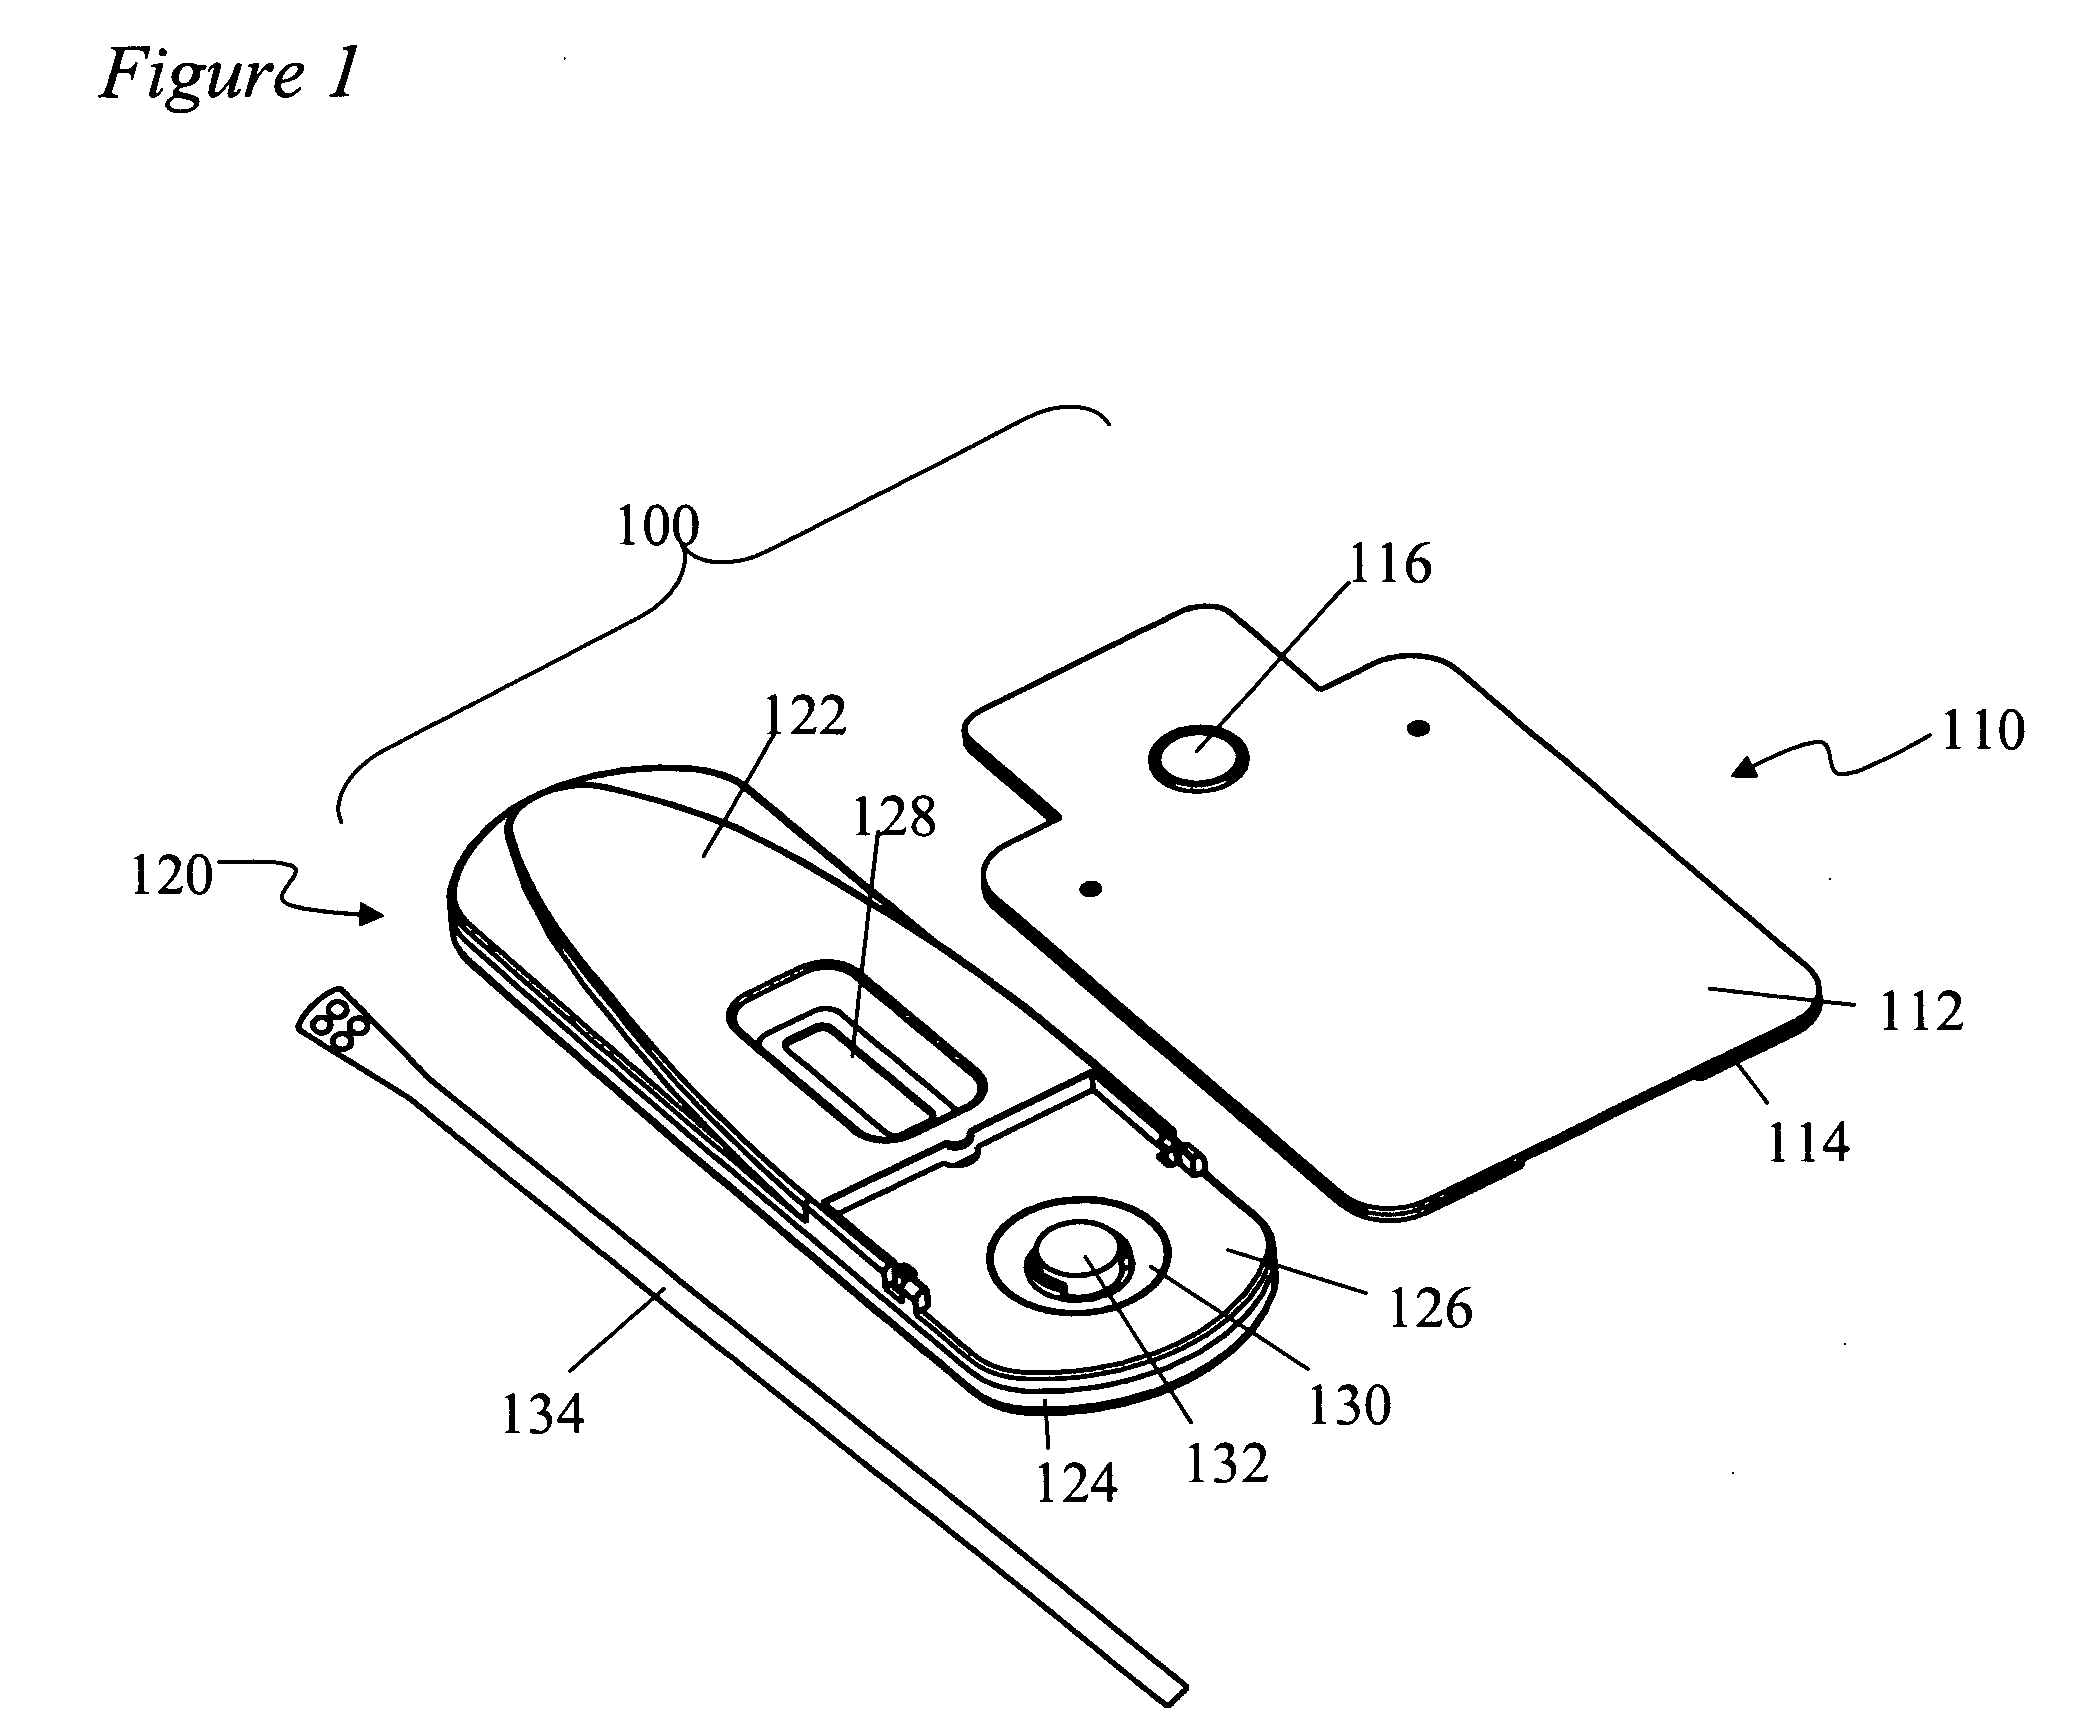 Devices and methods for sample collection and analysis